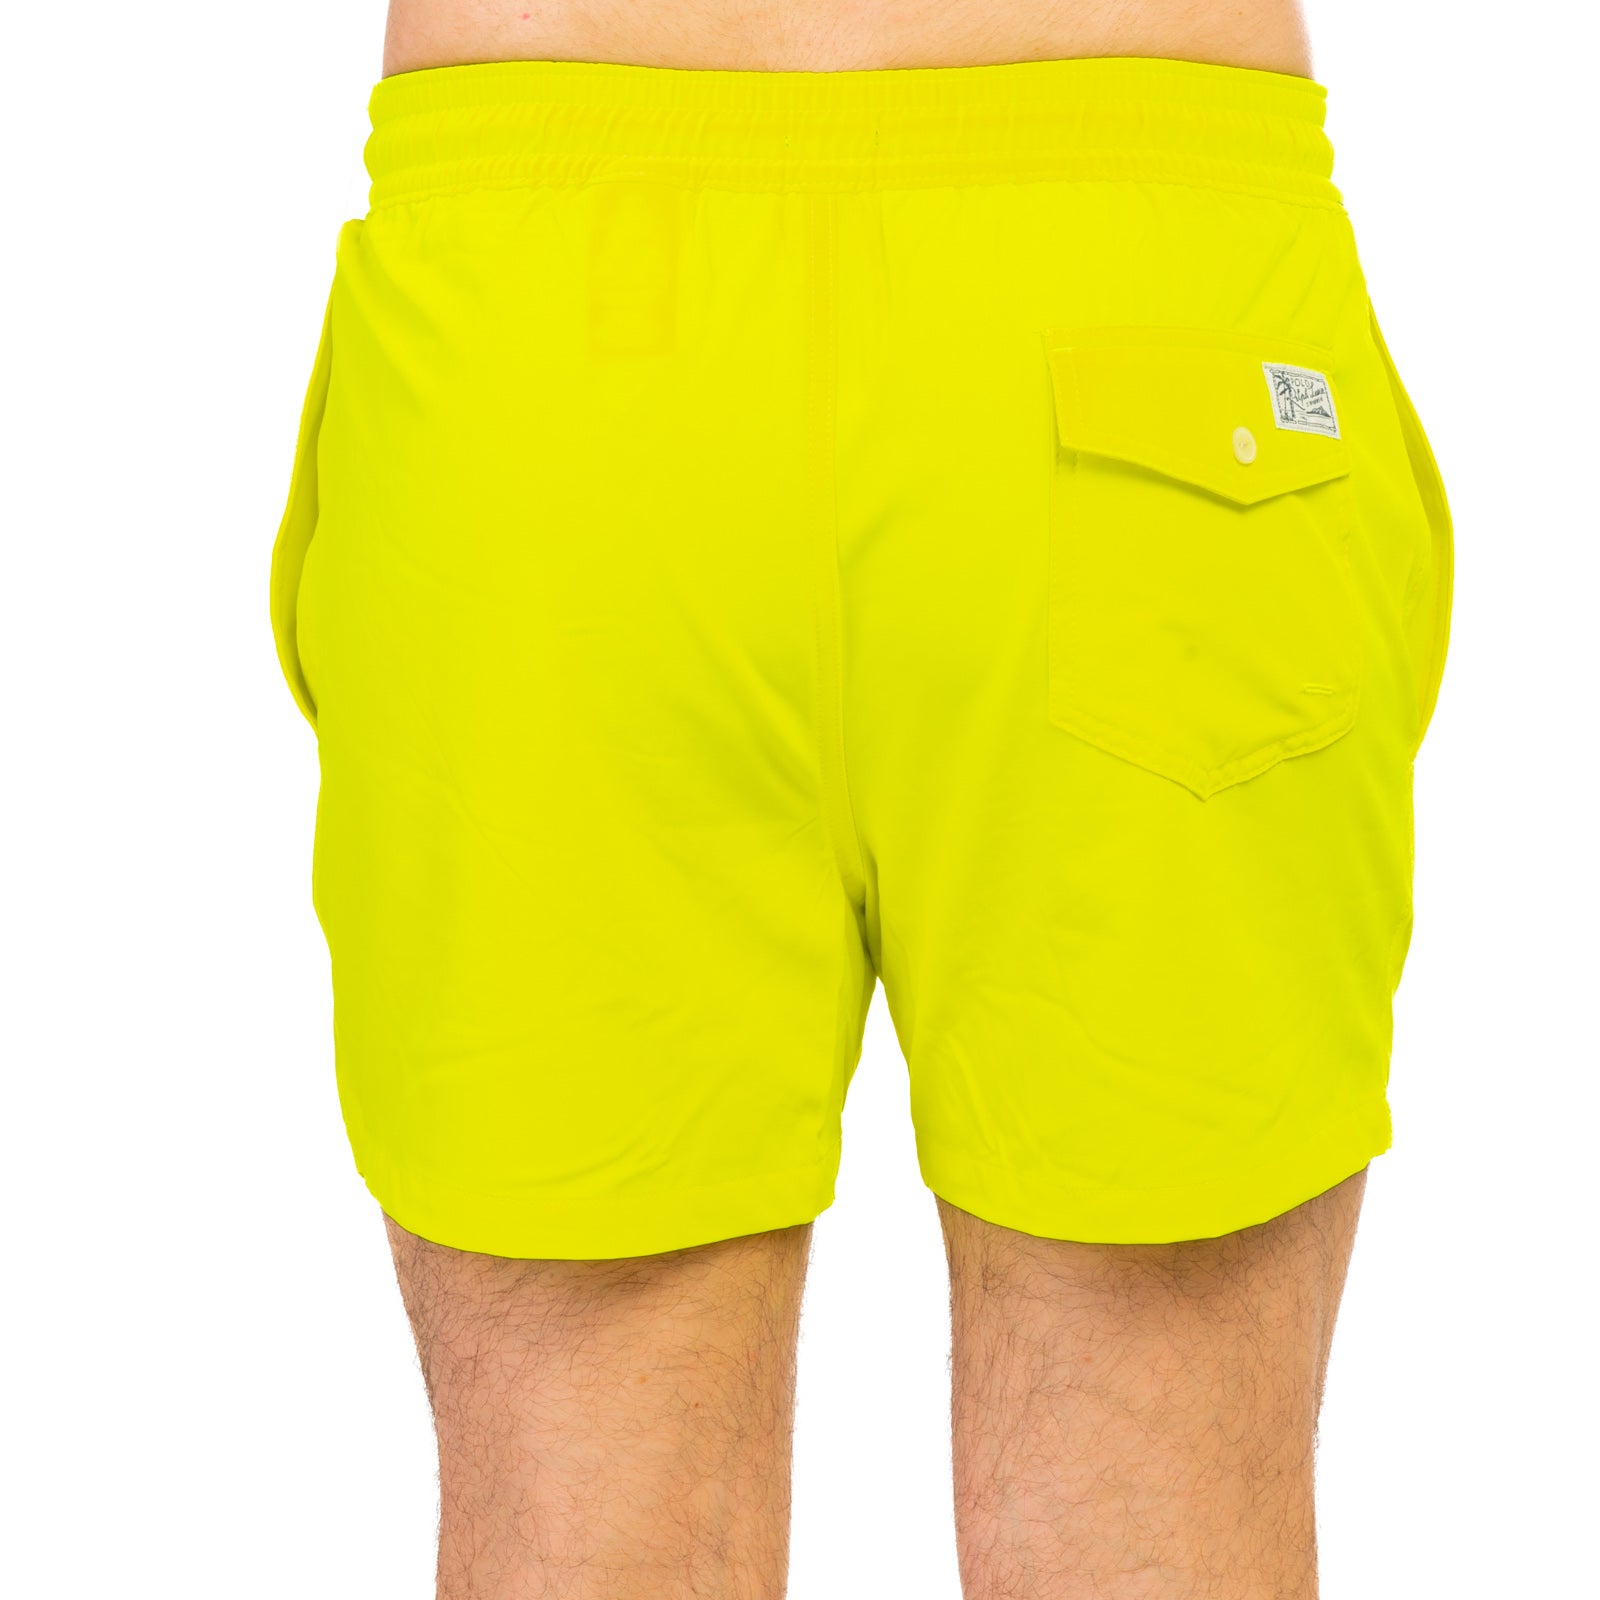 Boxer mare POLO RALPH LAUREN
Safety yellow